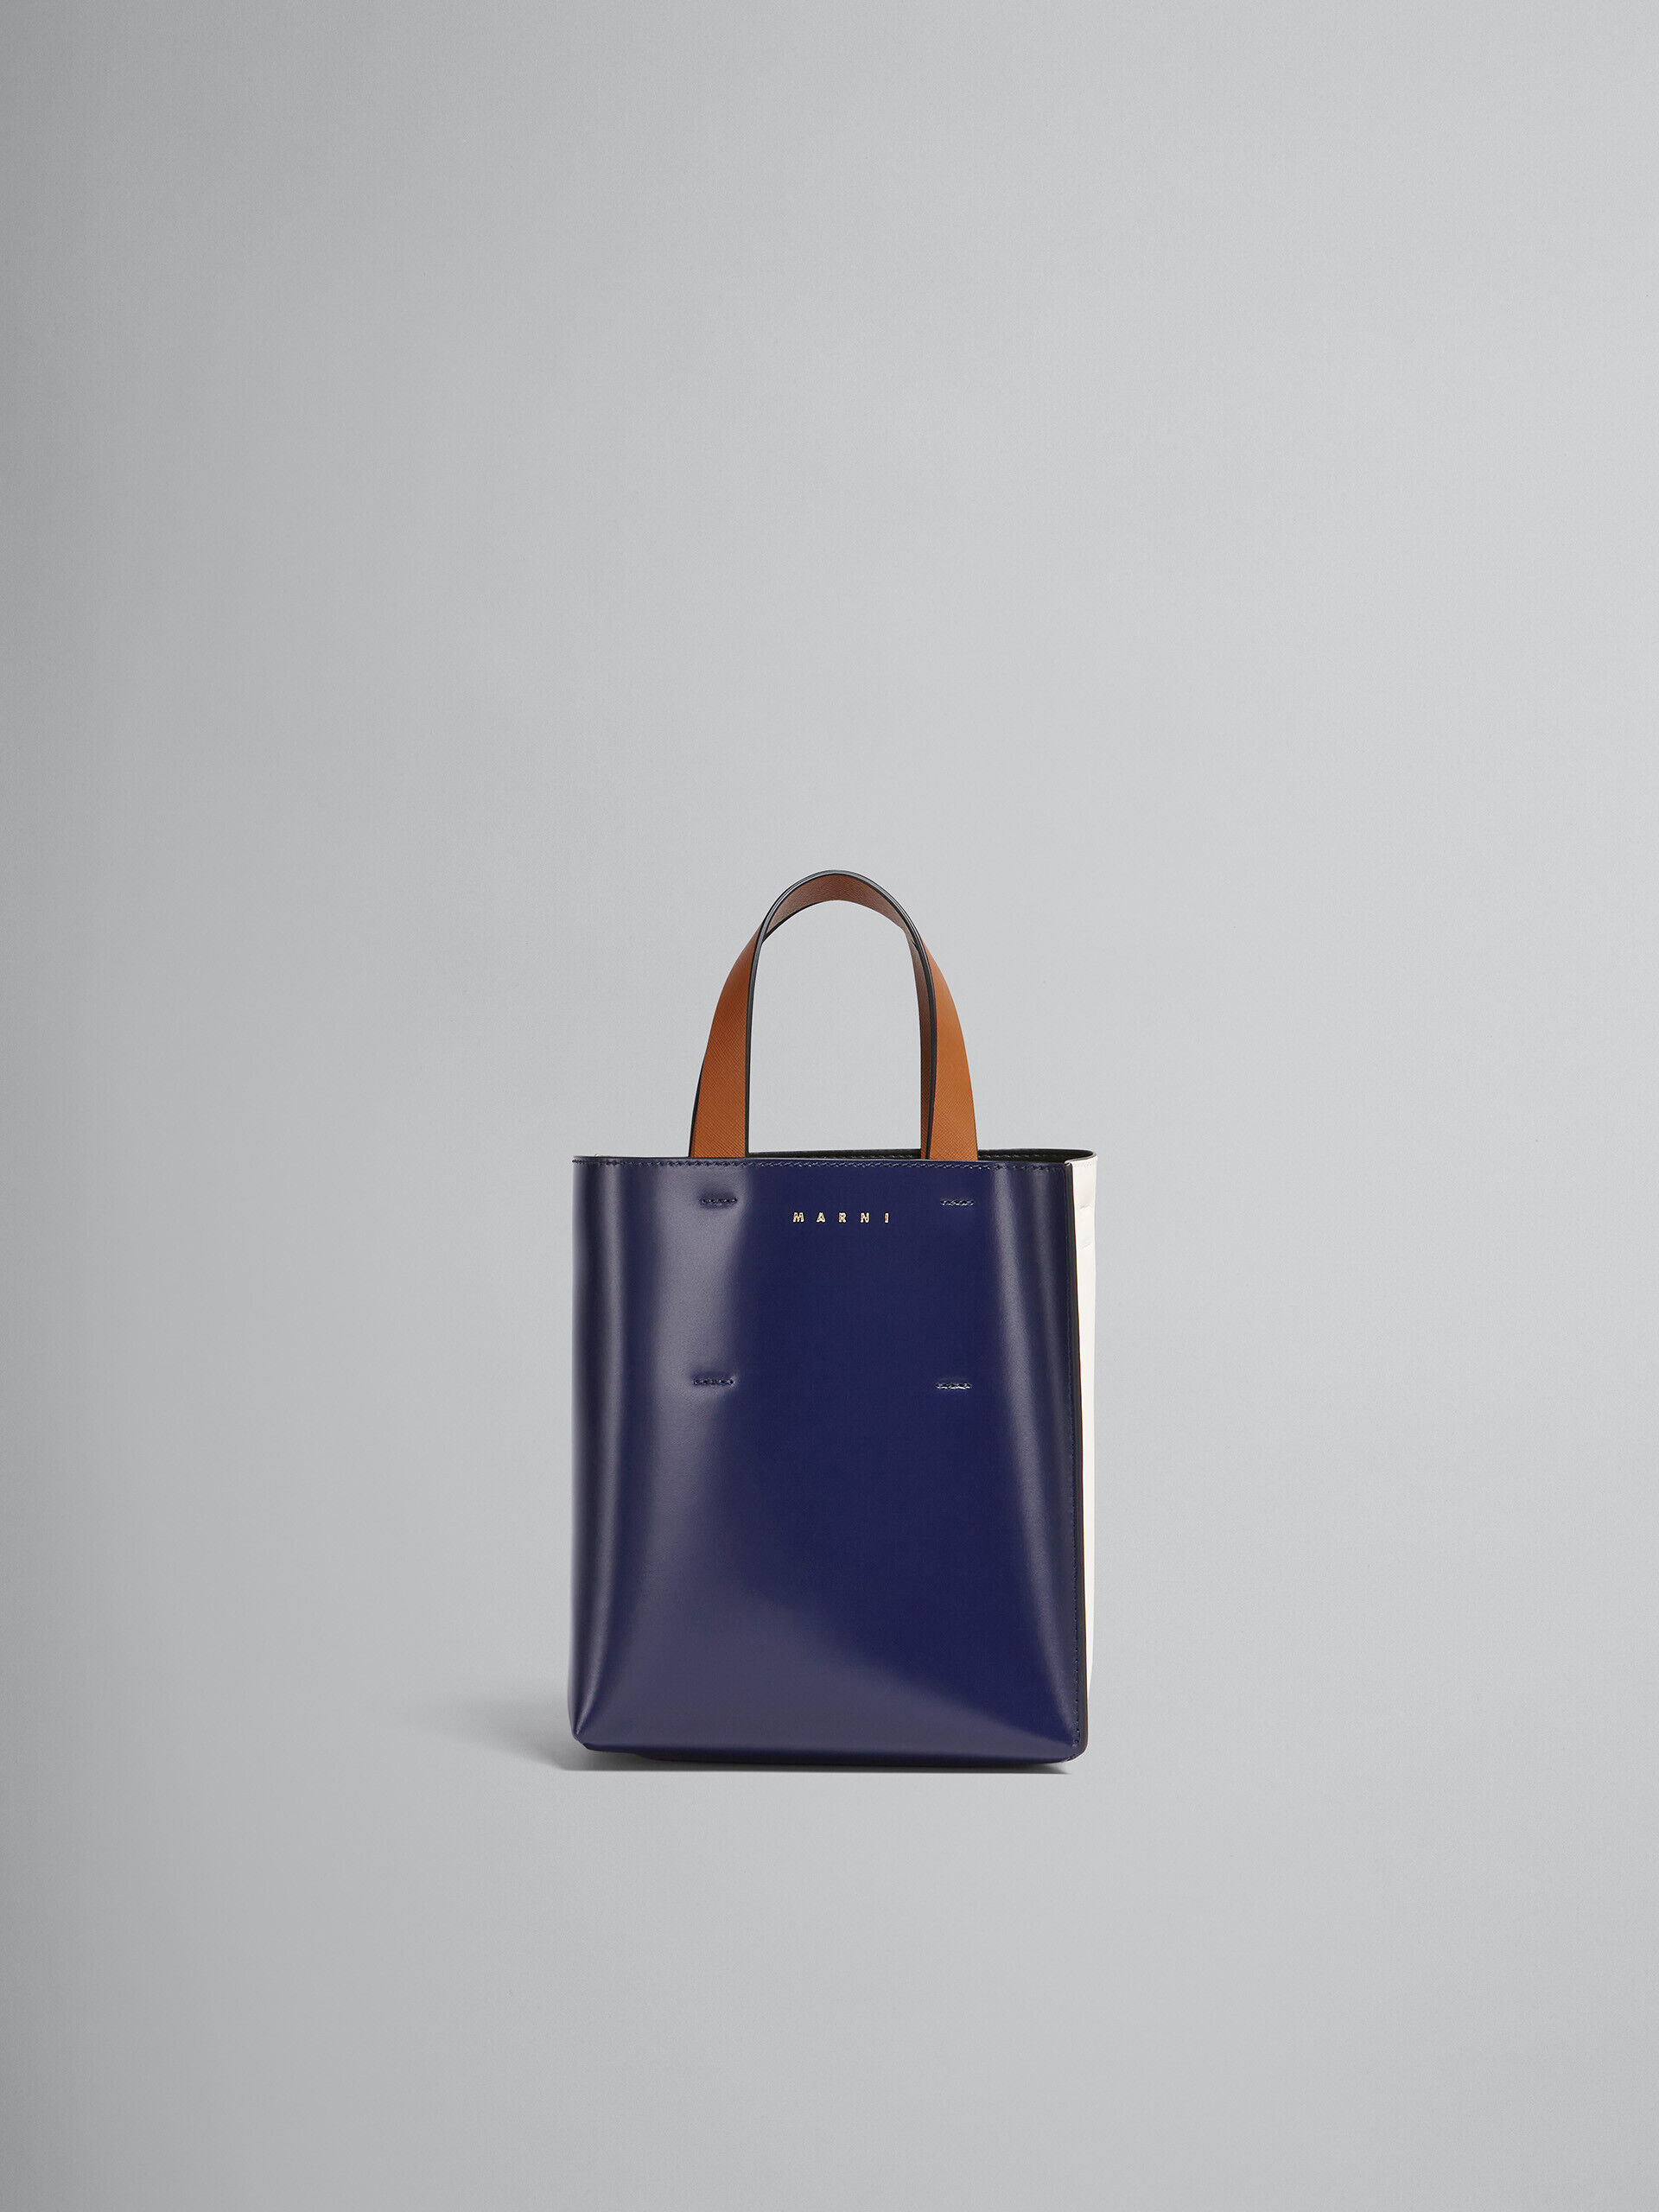 MUSEO mini bag in blue and white leather | Marni